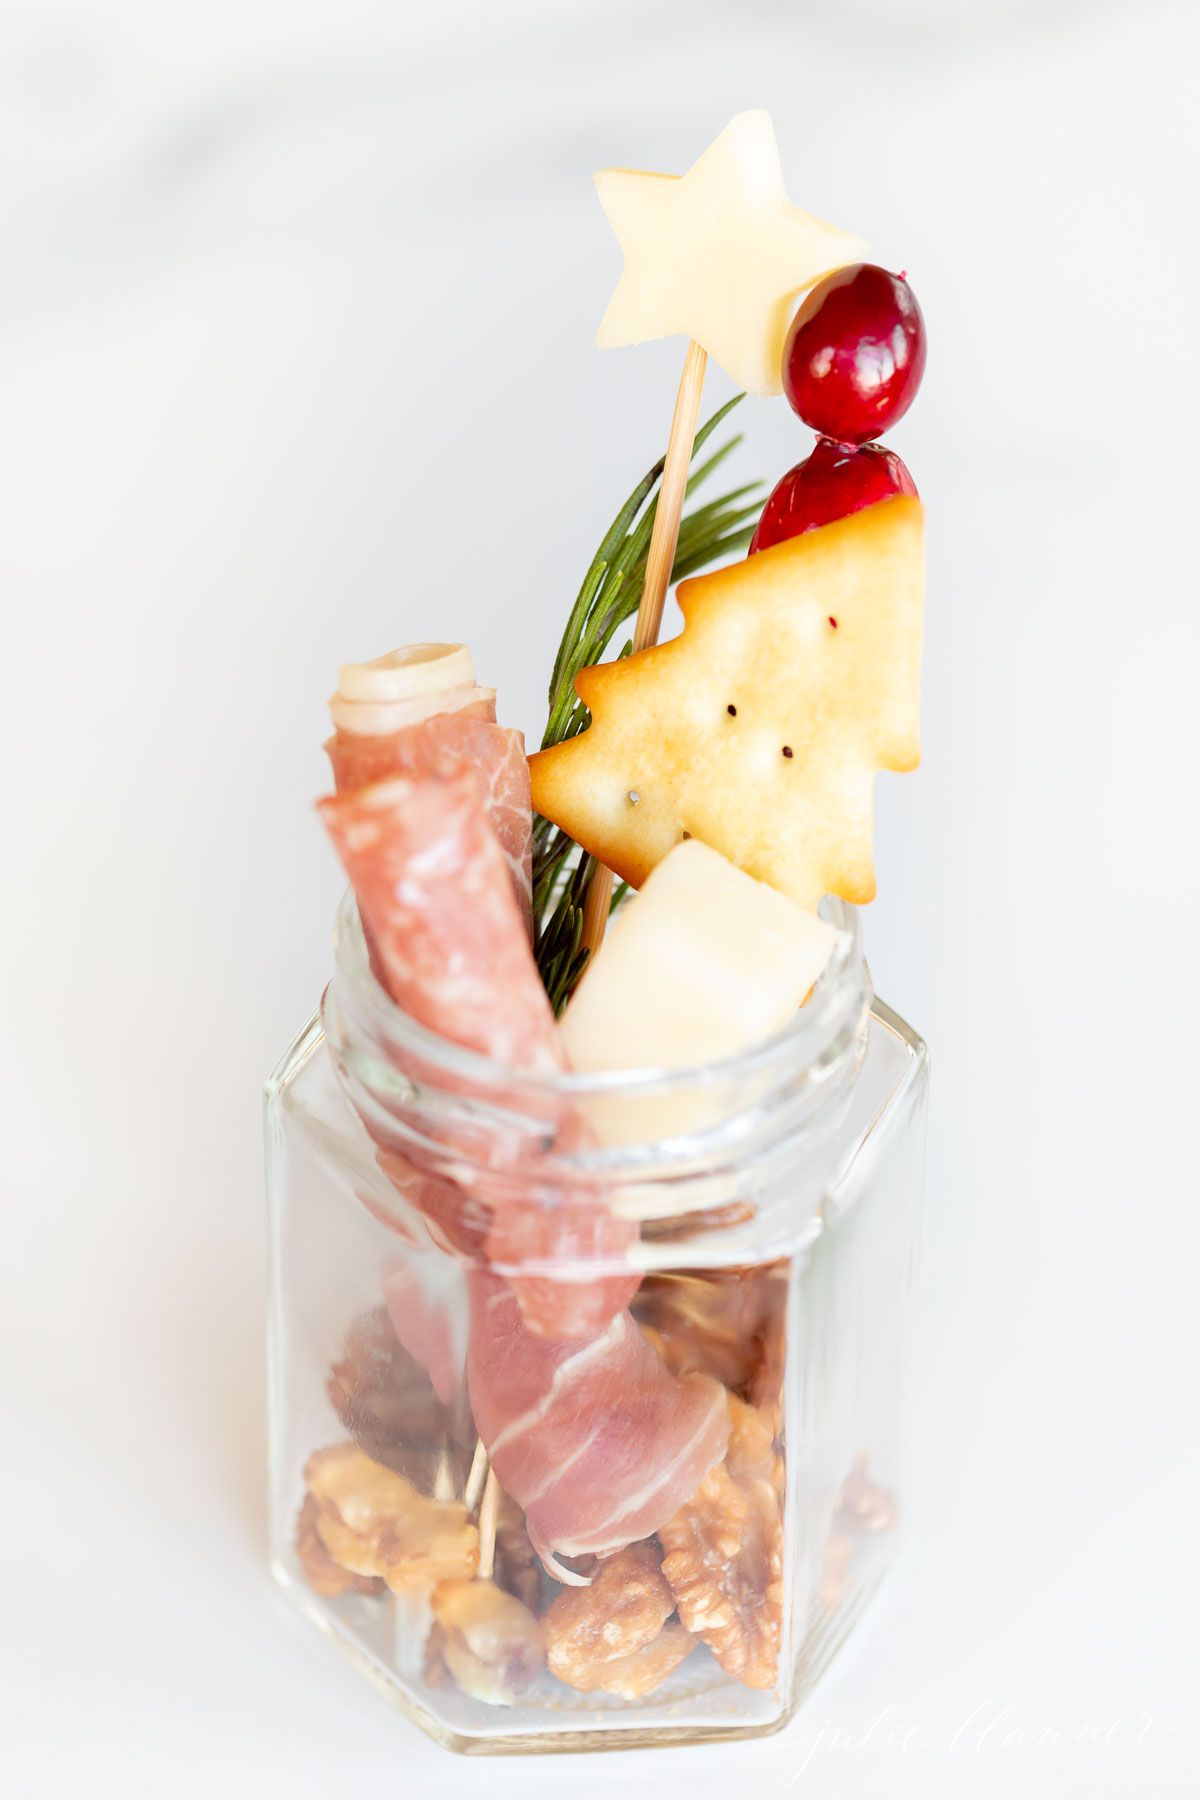 Charcuterie in a jar on a marble countertop